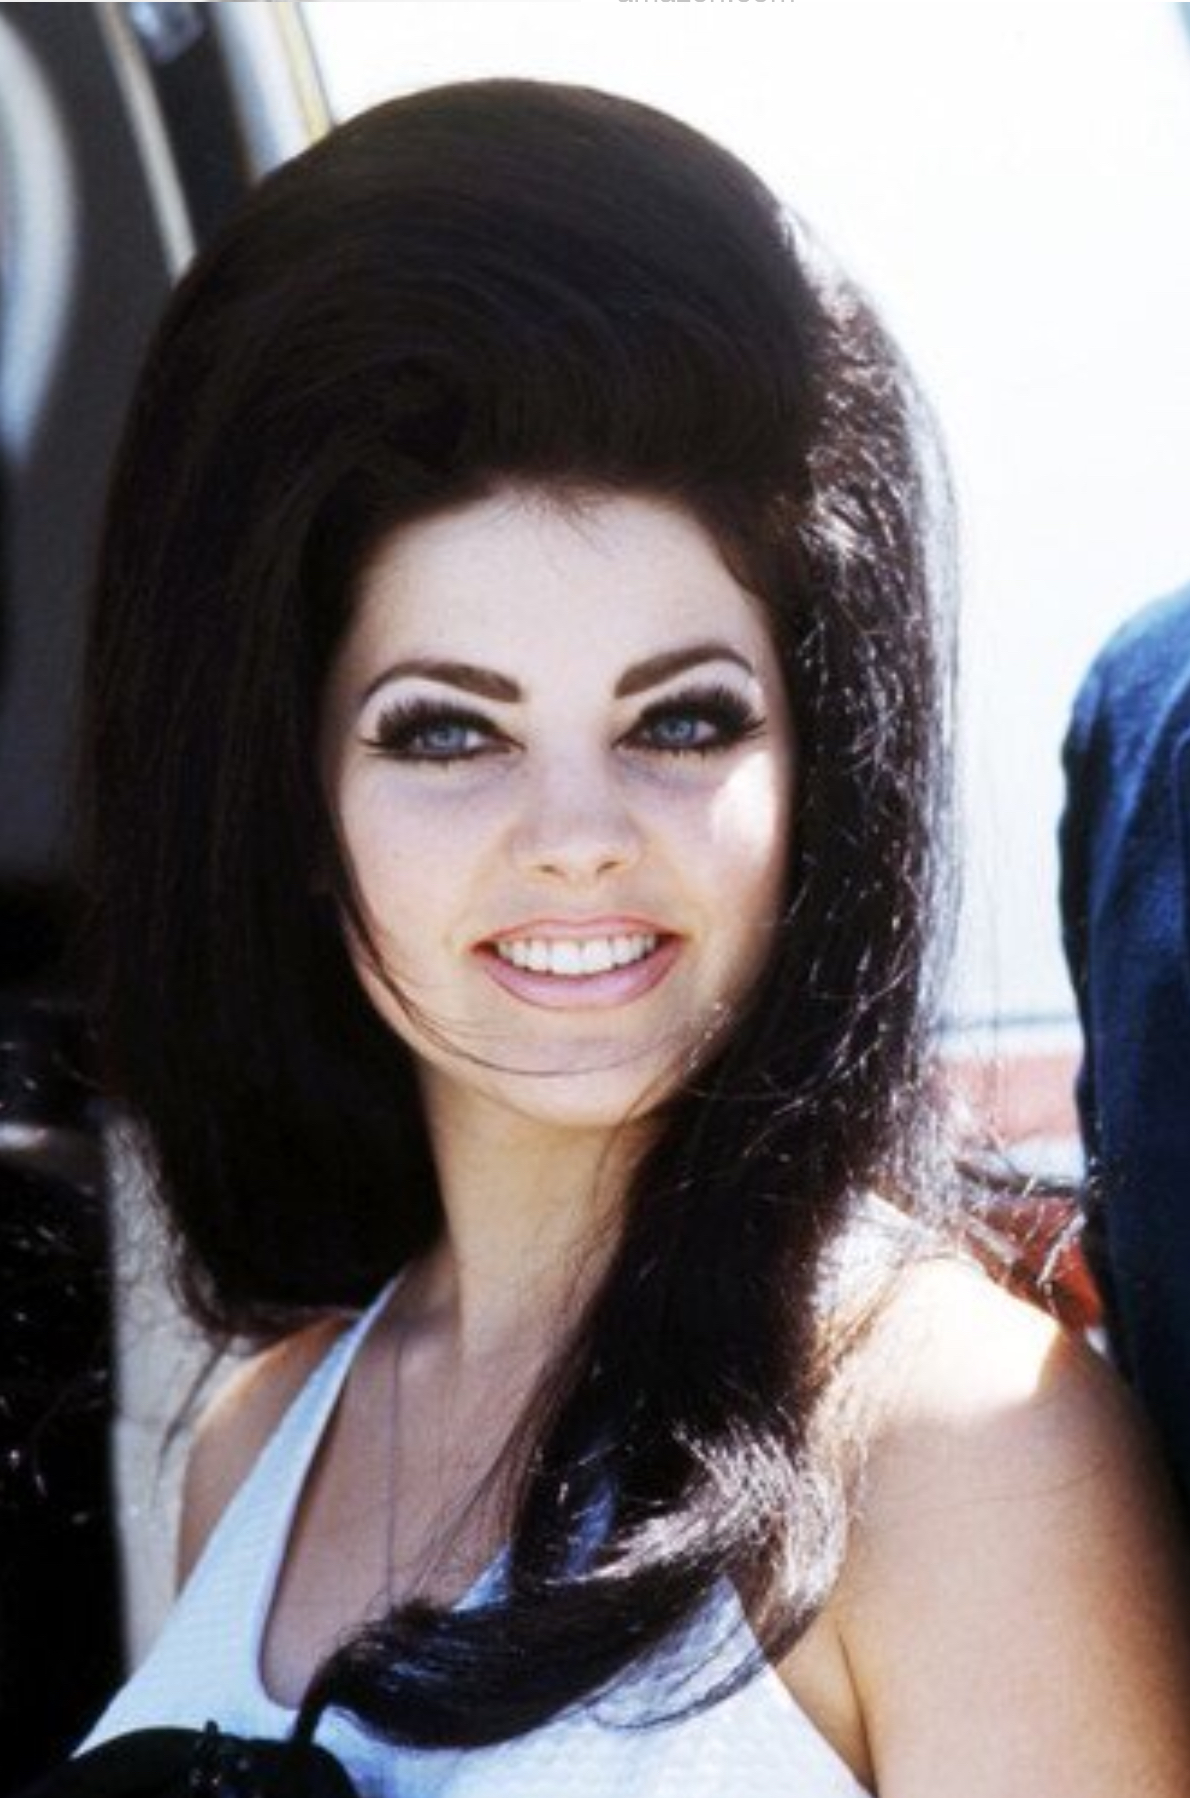 Priscilla Presley's Chic 70s Style Is Revived in This Very Peri